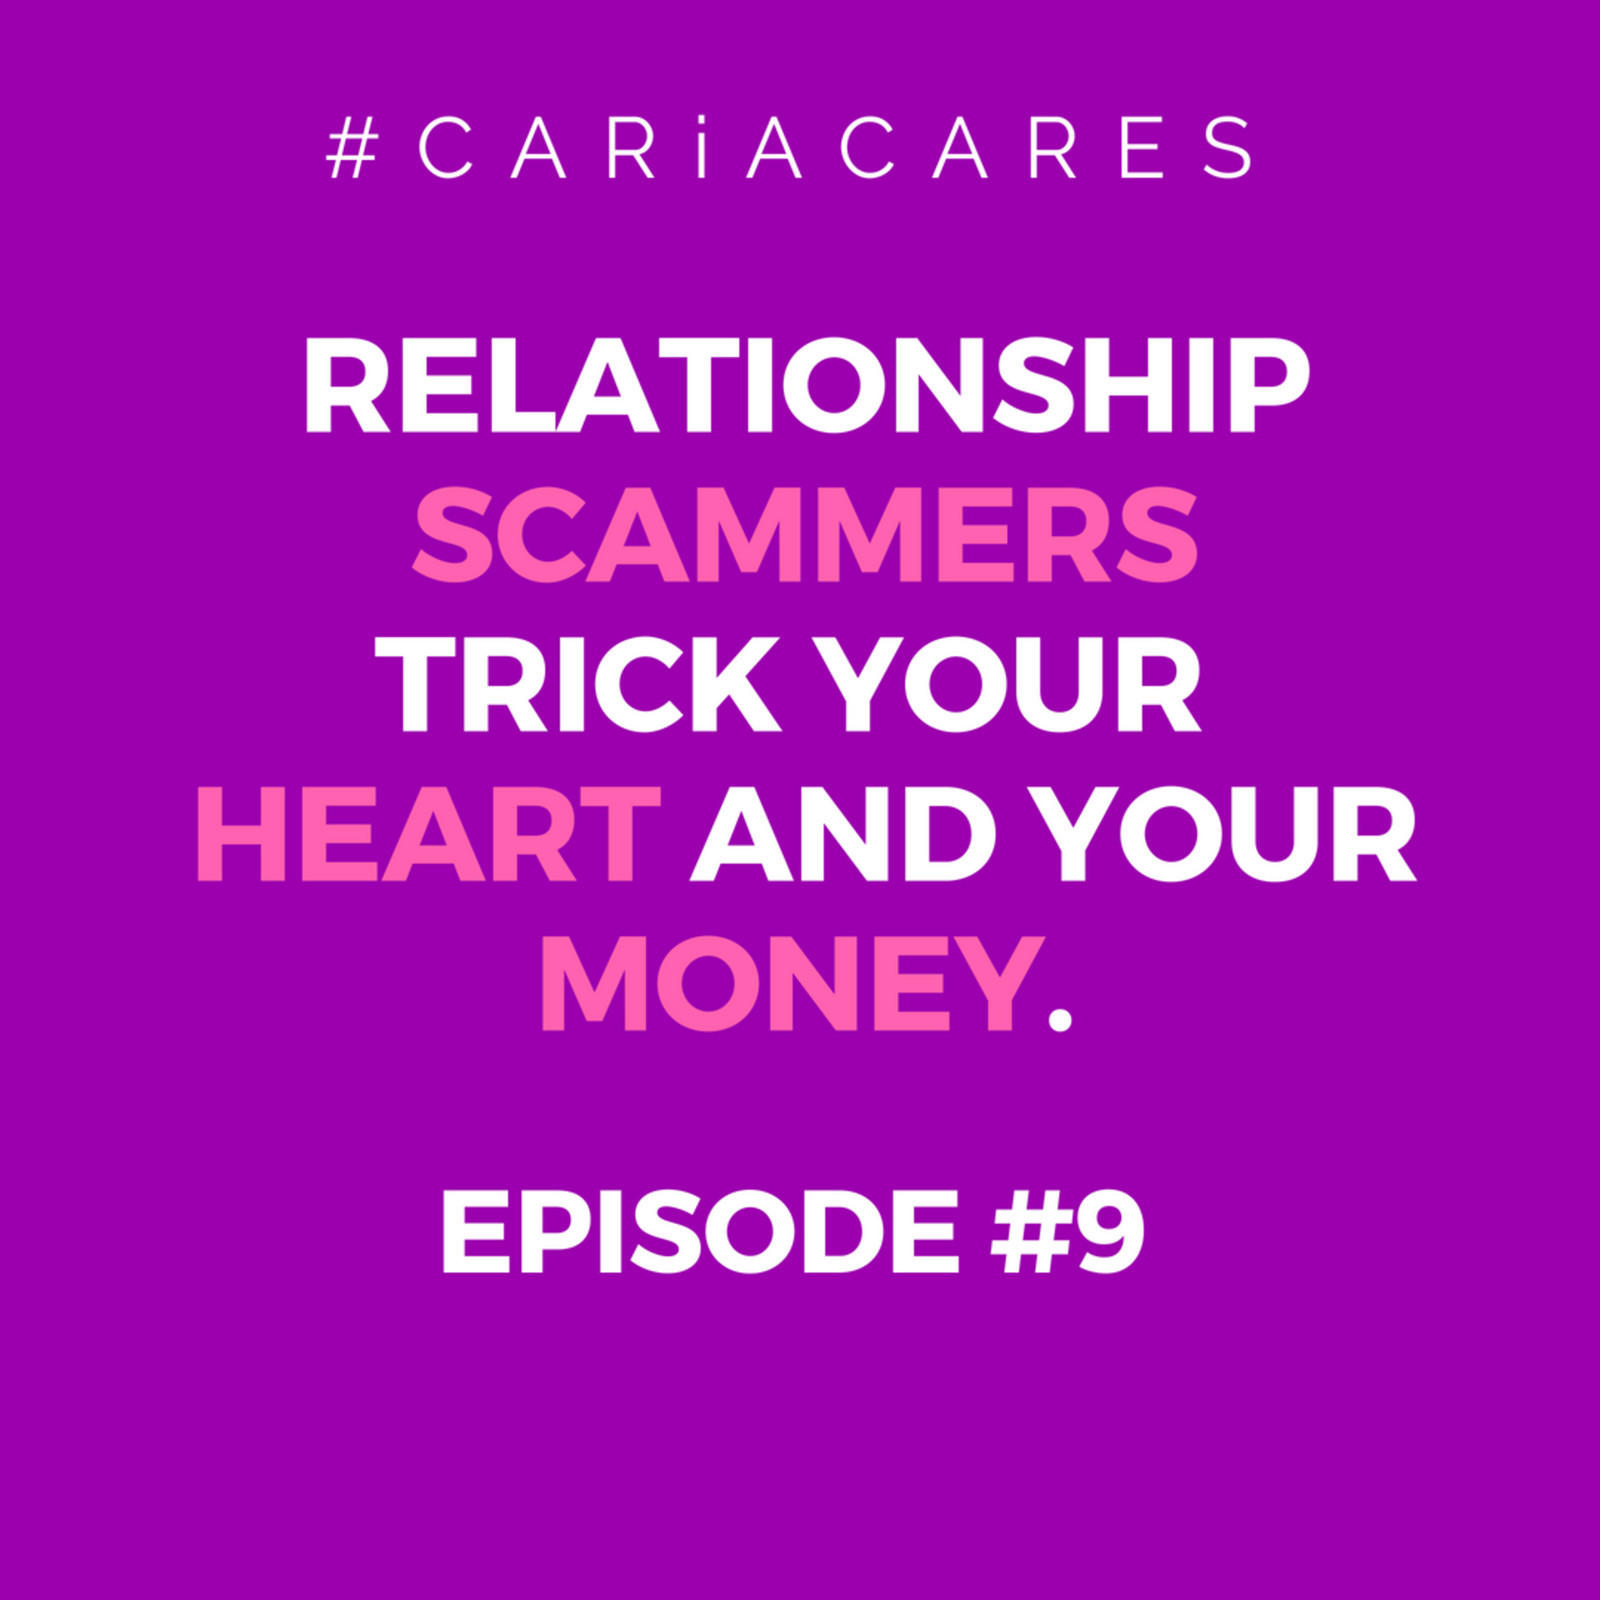 Relationship Scammers trick your heart and money